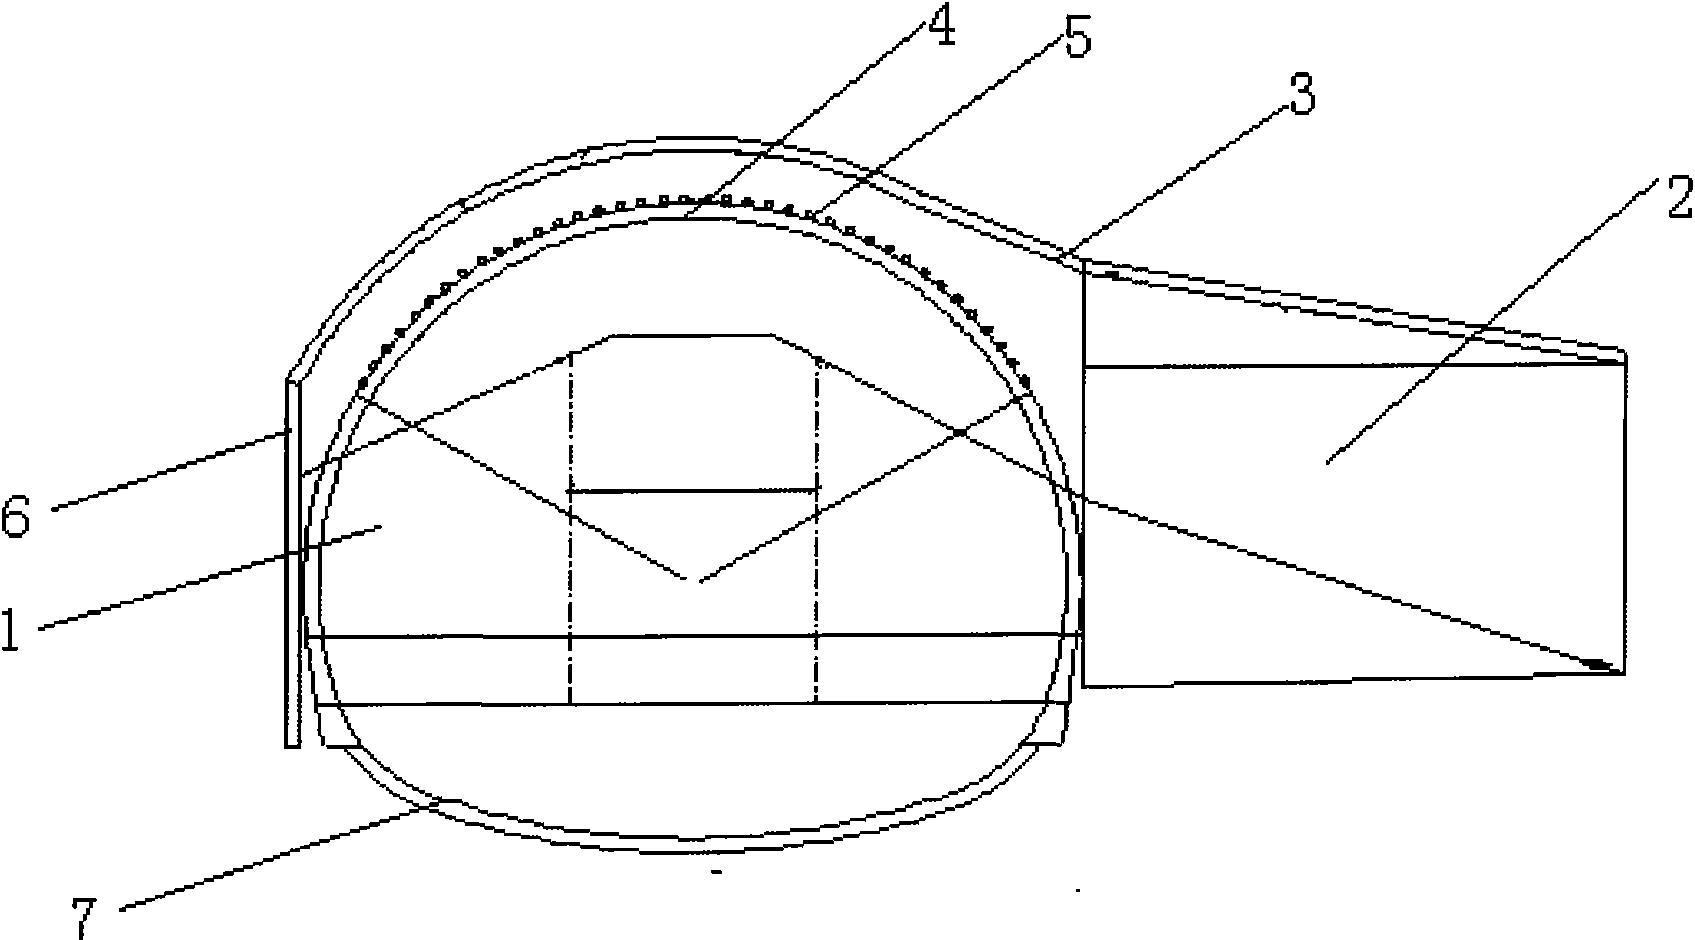 Method for constructing from inclined shaft to main tunnel in weak surrounding rock